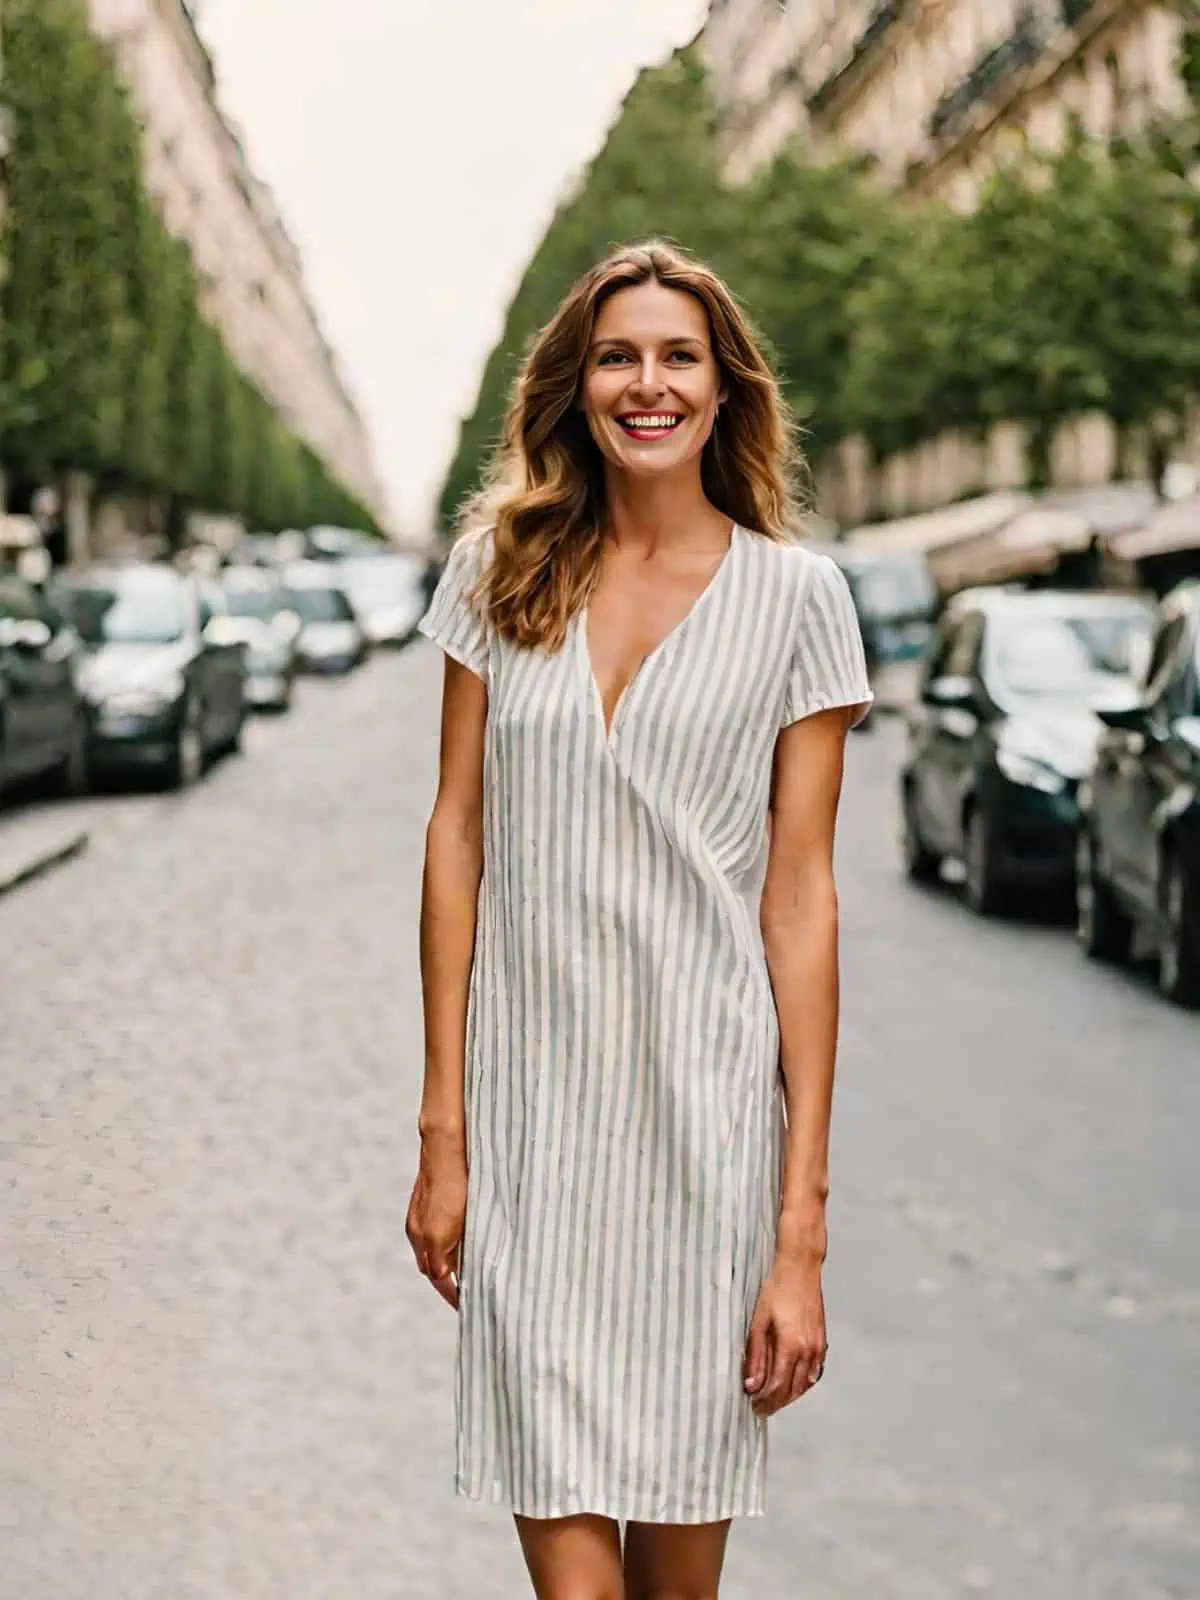 12 Types of Dresses That Make You Look Slimmer - Petite Dressing